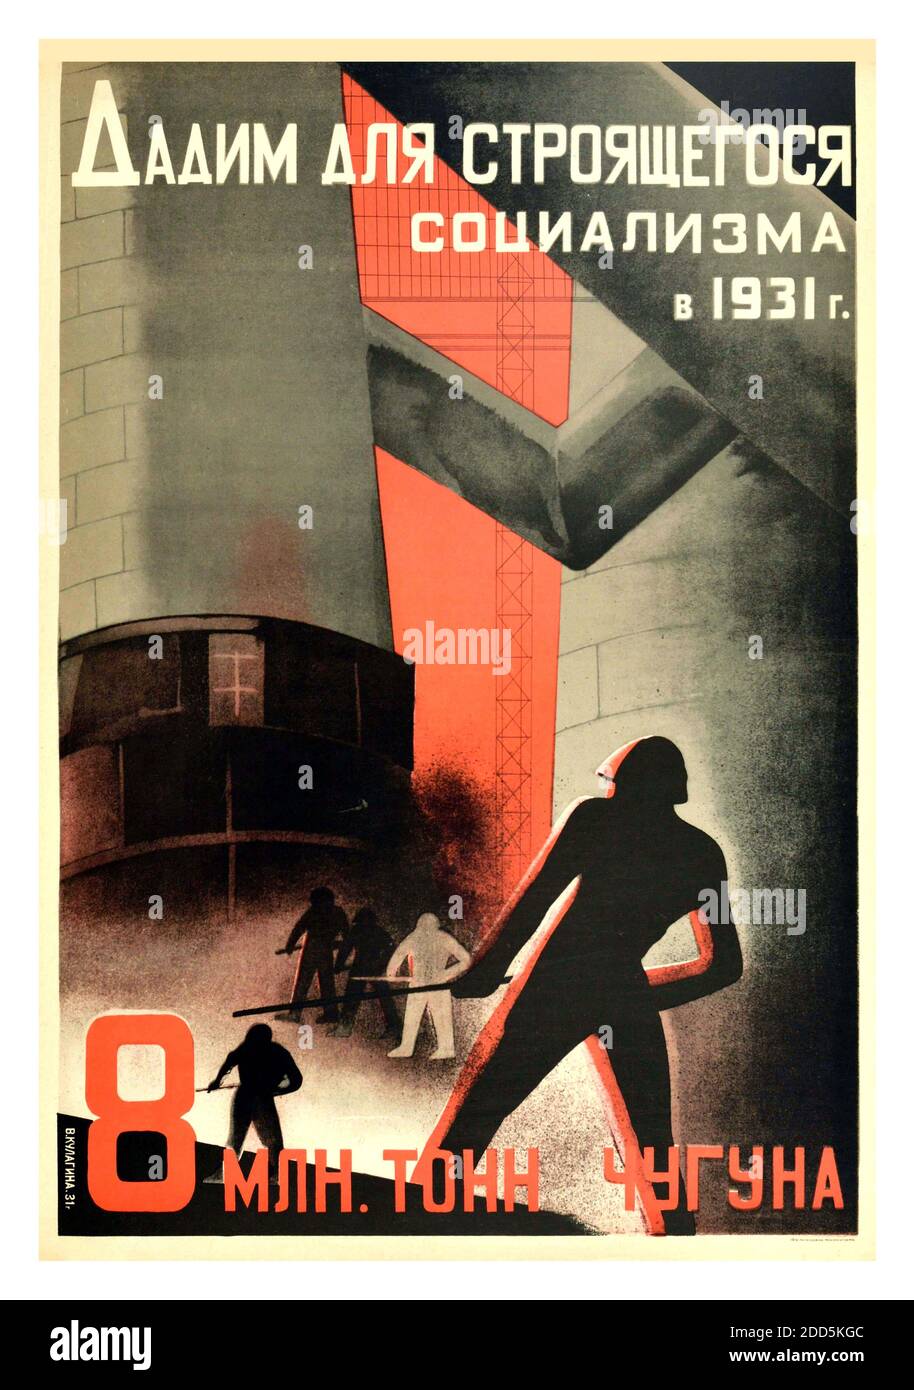 Russia 1930's industrial output Vintage official 1931 Soviet Russia propaganda poster  - 'We give for building socialism 1931 - 8 million tons of pig iron' - artwork features silhouettes of metal workers working in a factory among large grey brick pillars.  Russia, Soviet Union designer: V. Kulagina, Stock Photo